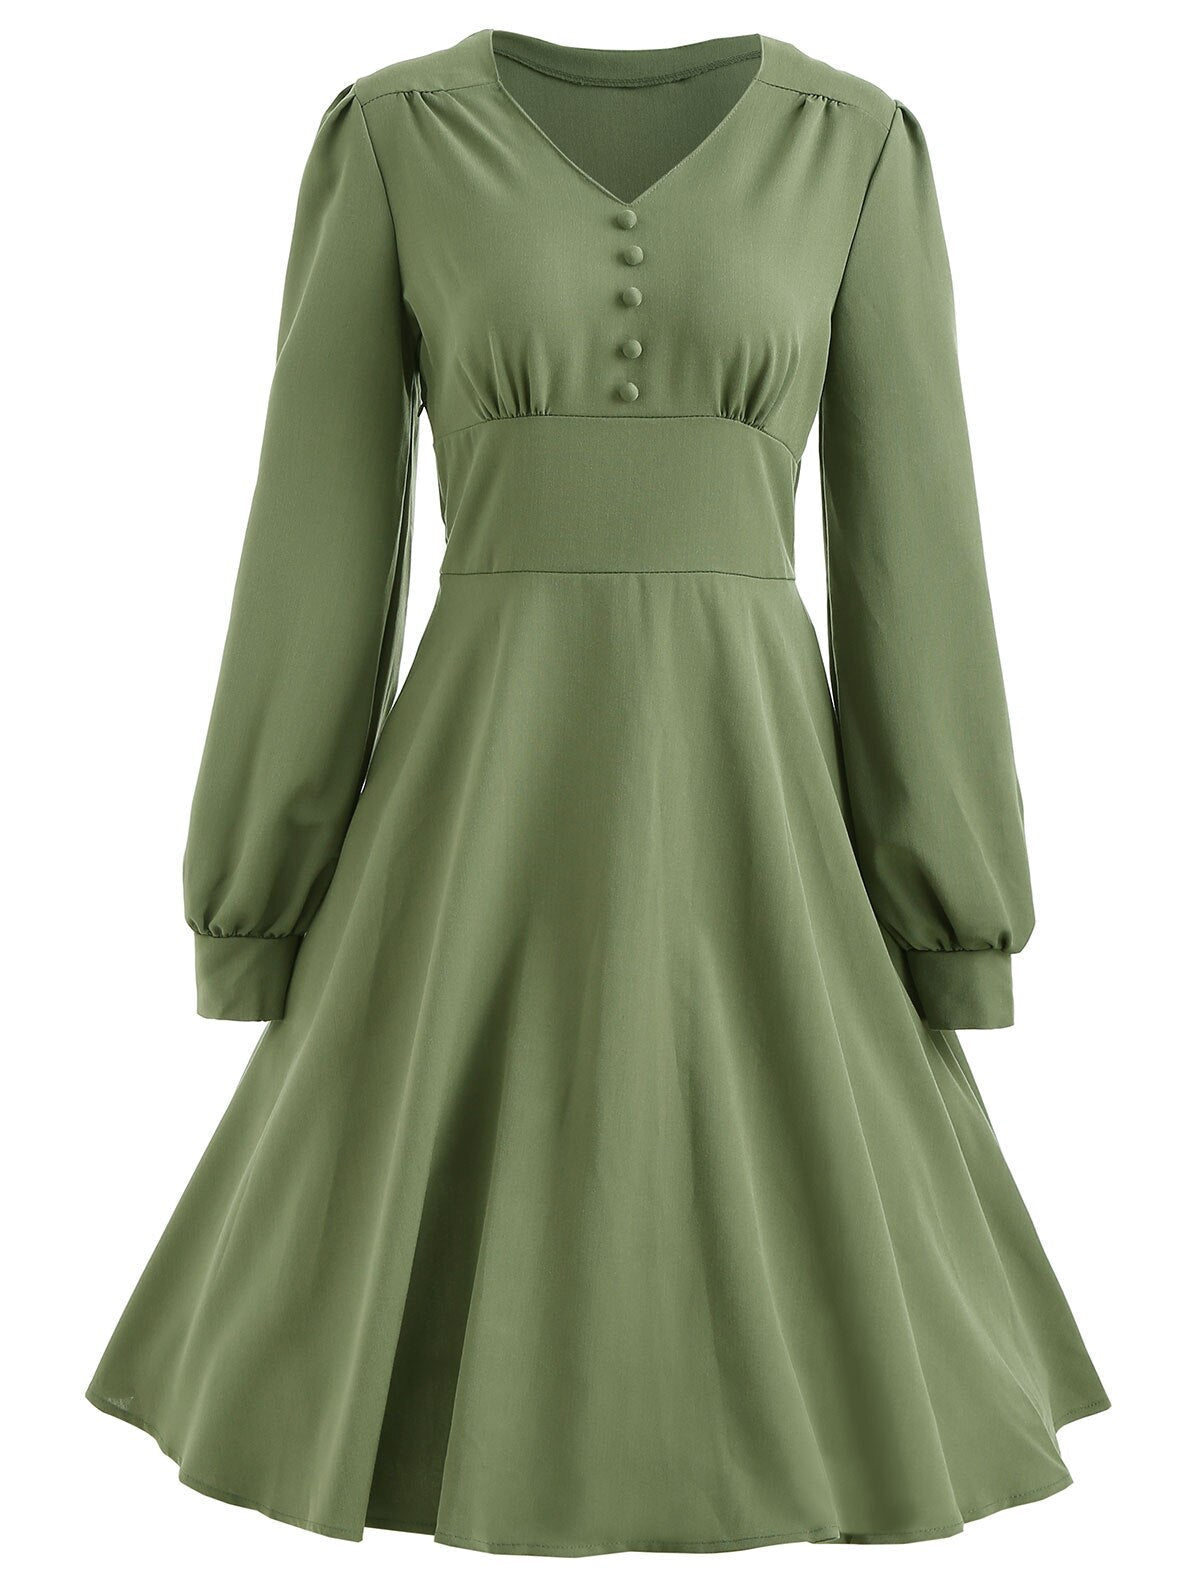 Robe Fille Style Année 30